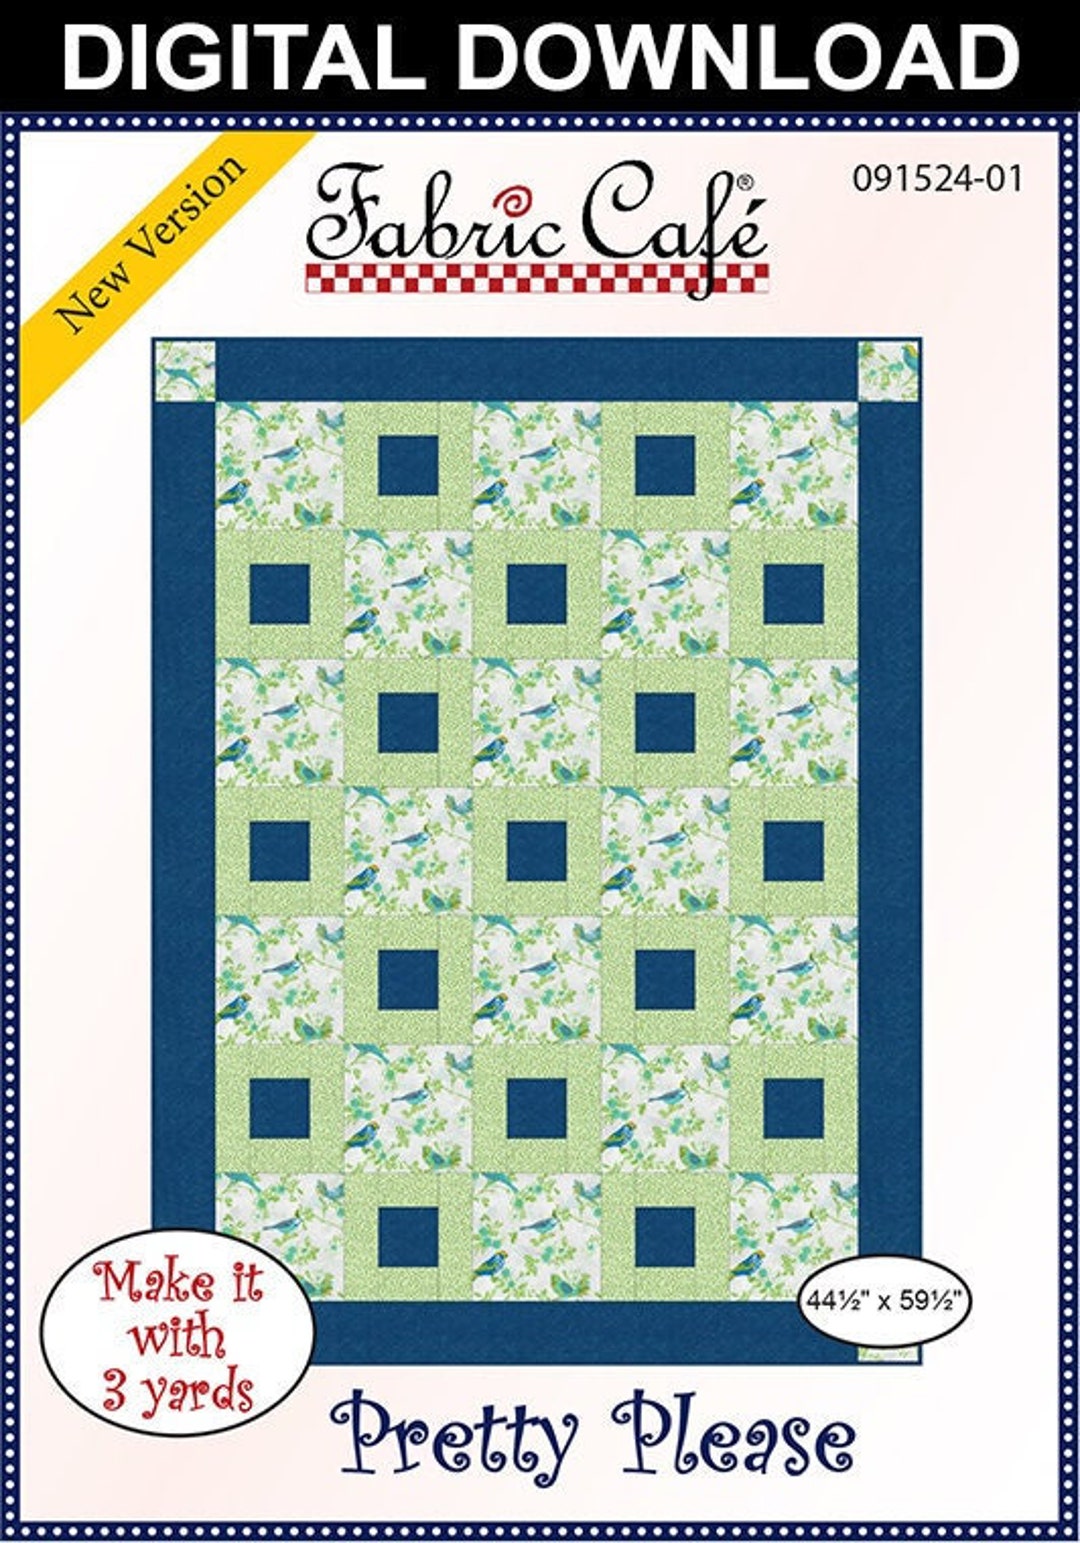 Easy Does It 3-Yard Quilts - Downloadable Pattern Book